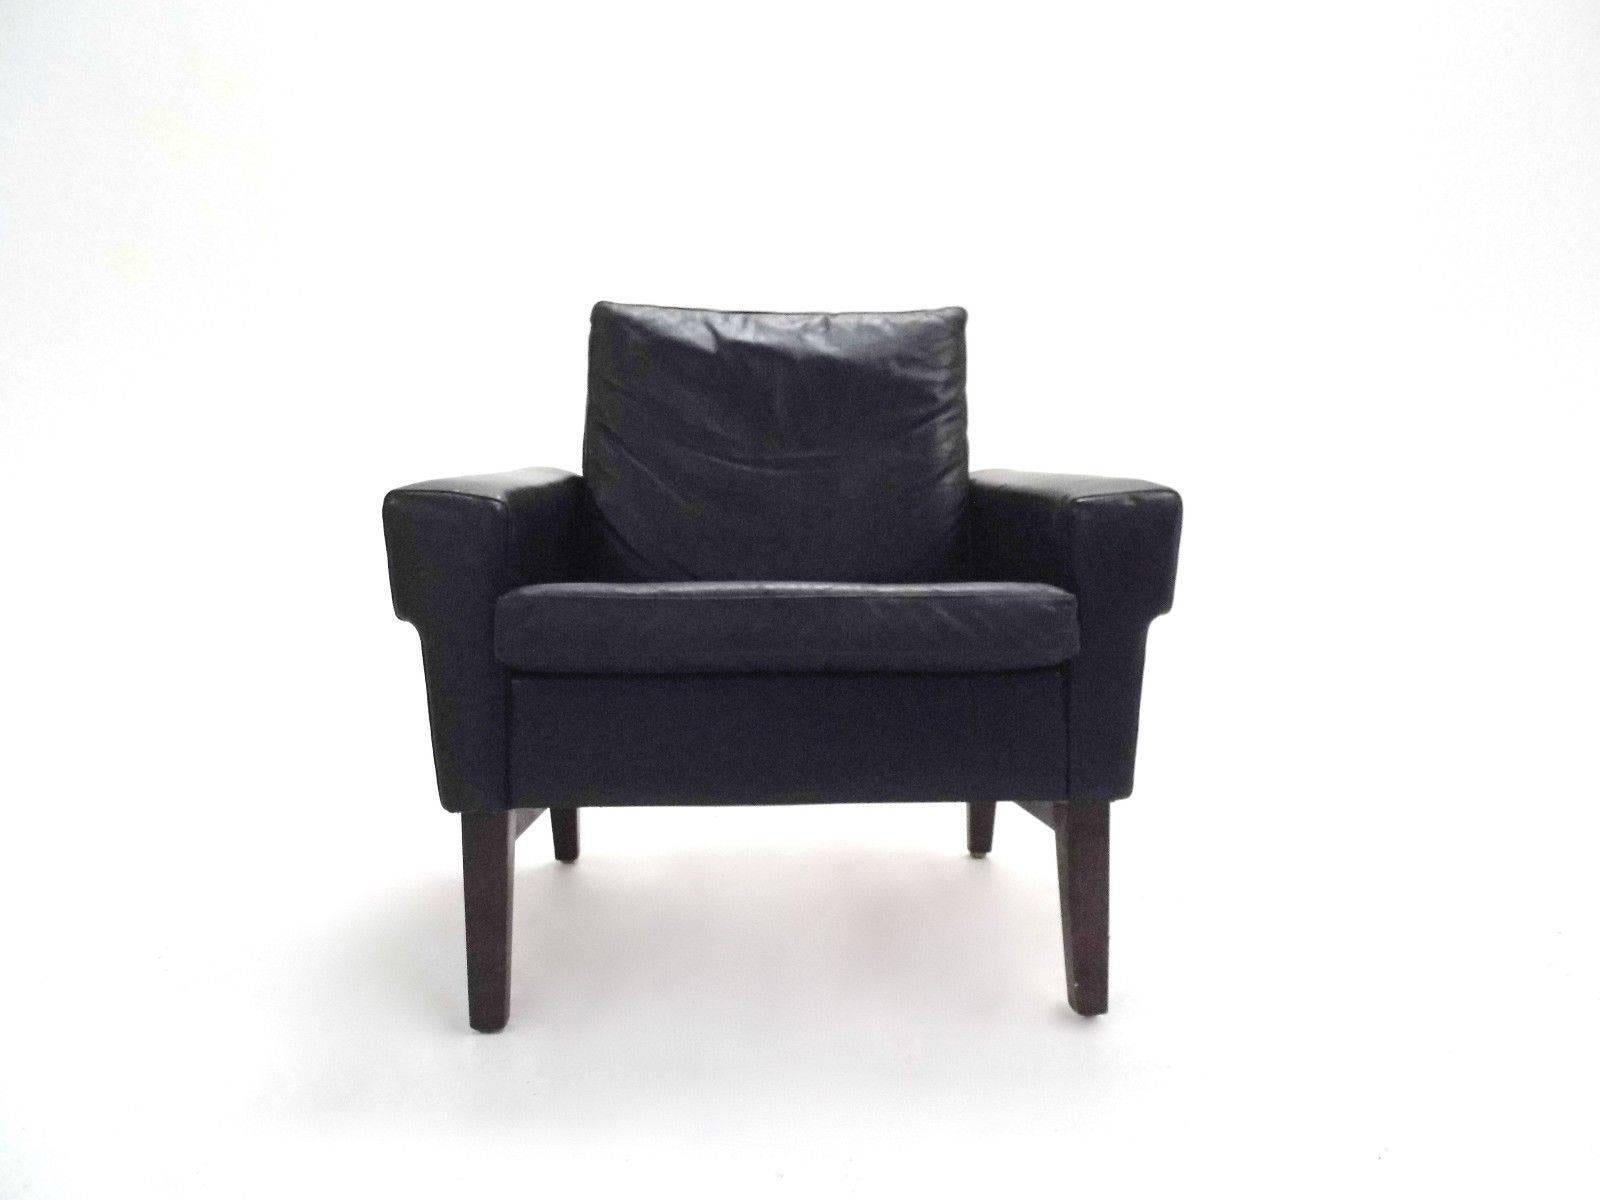 
A beautiful Danish black leather armchair, this would make a stylish addition to any living or work area. The chair has a wide seat and padded armrests for enhanced comfort. A striking piece of Classic Scandinavian furniture.

The chair is in